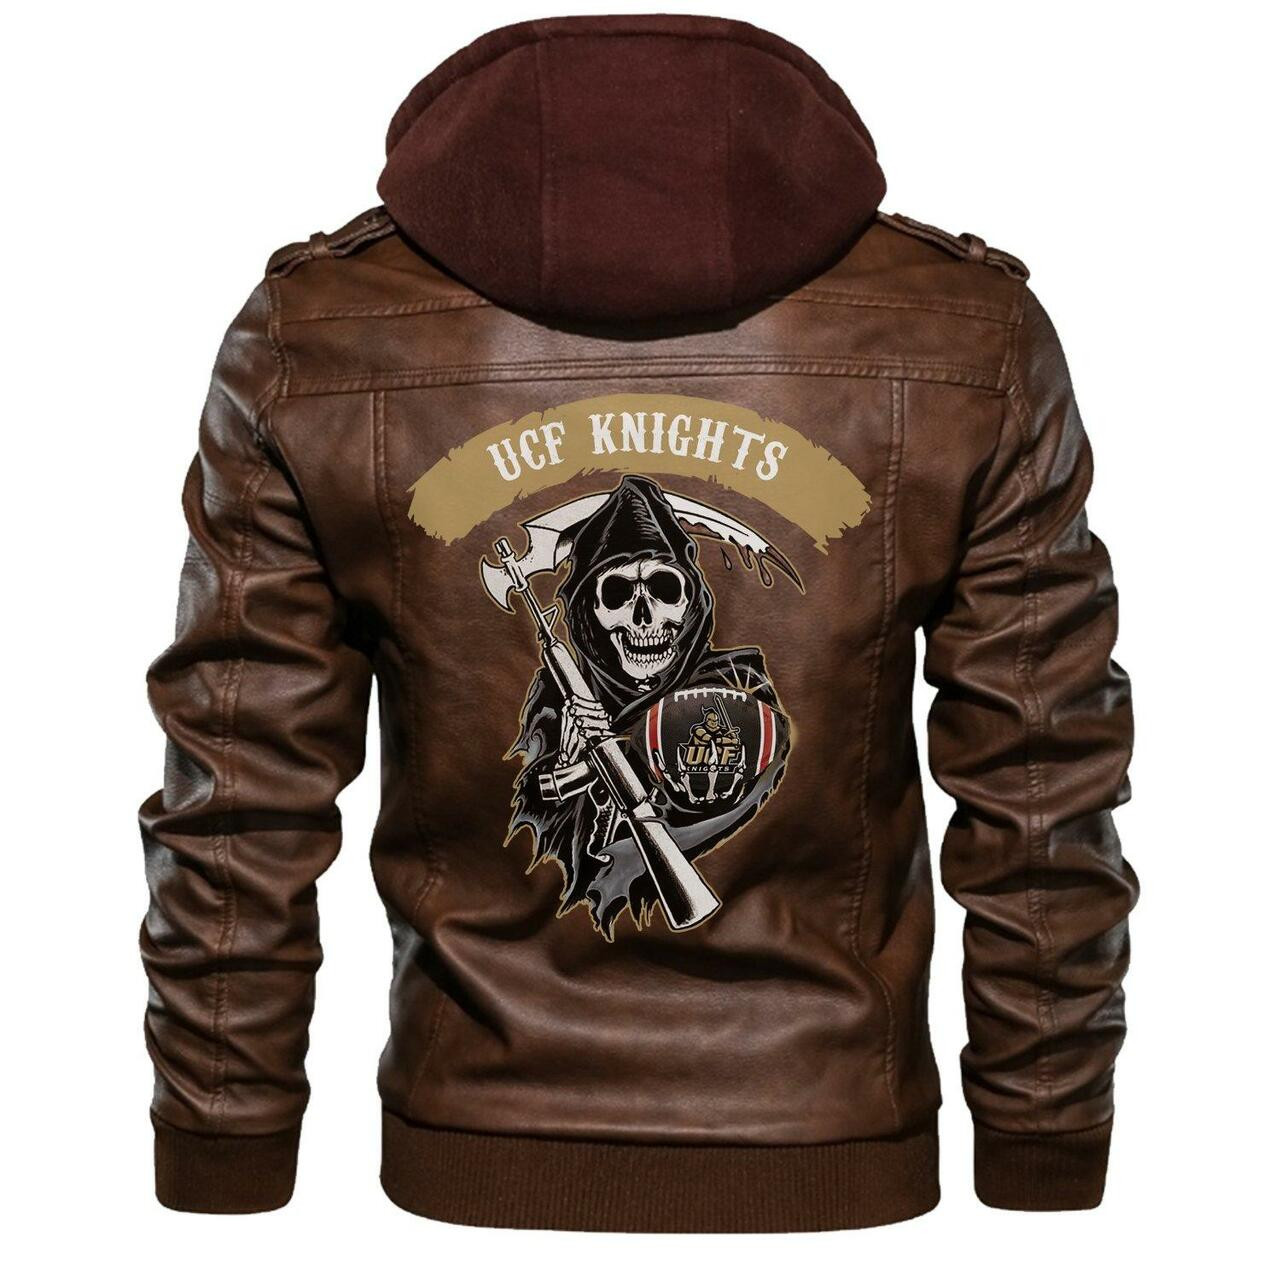 You can find Leather Jacket online at a great price 27